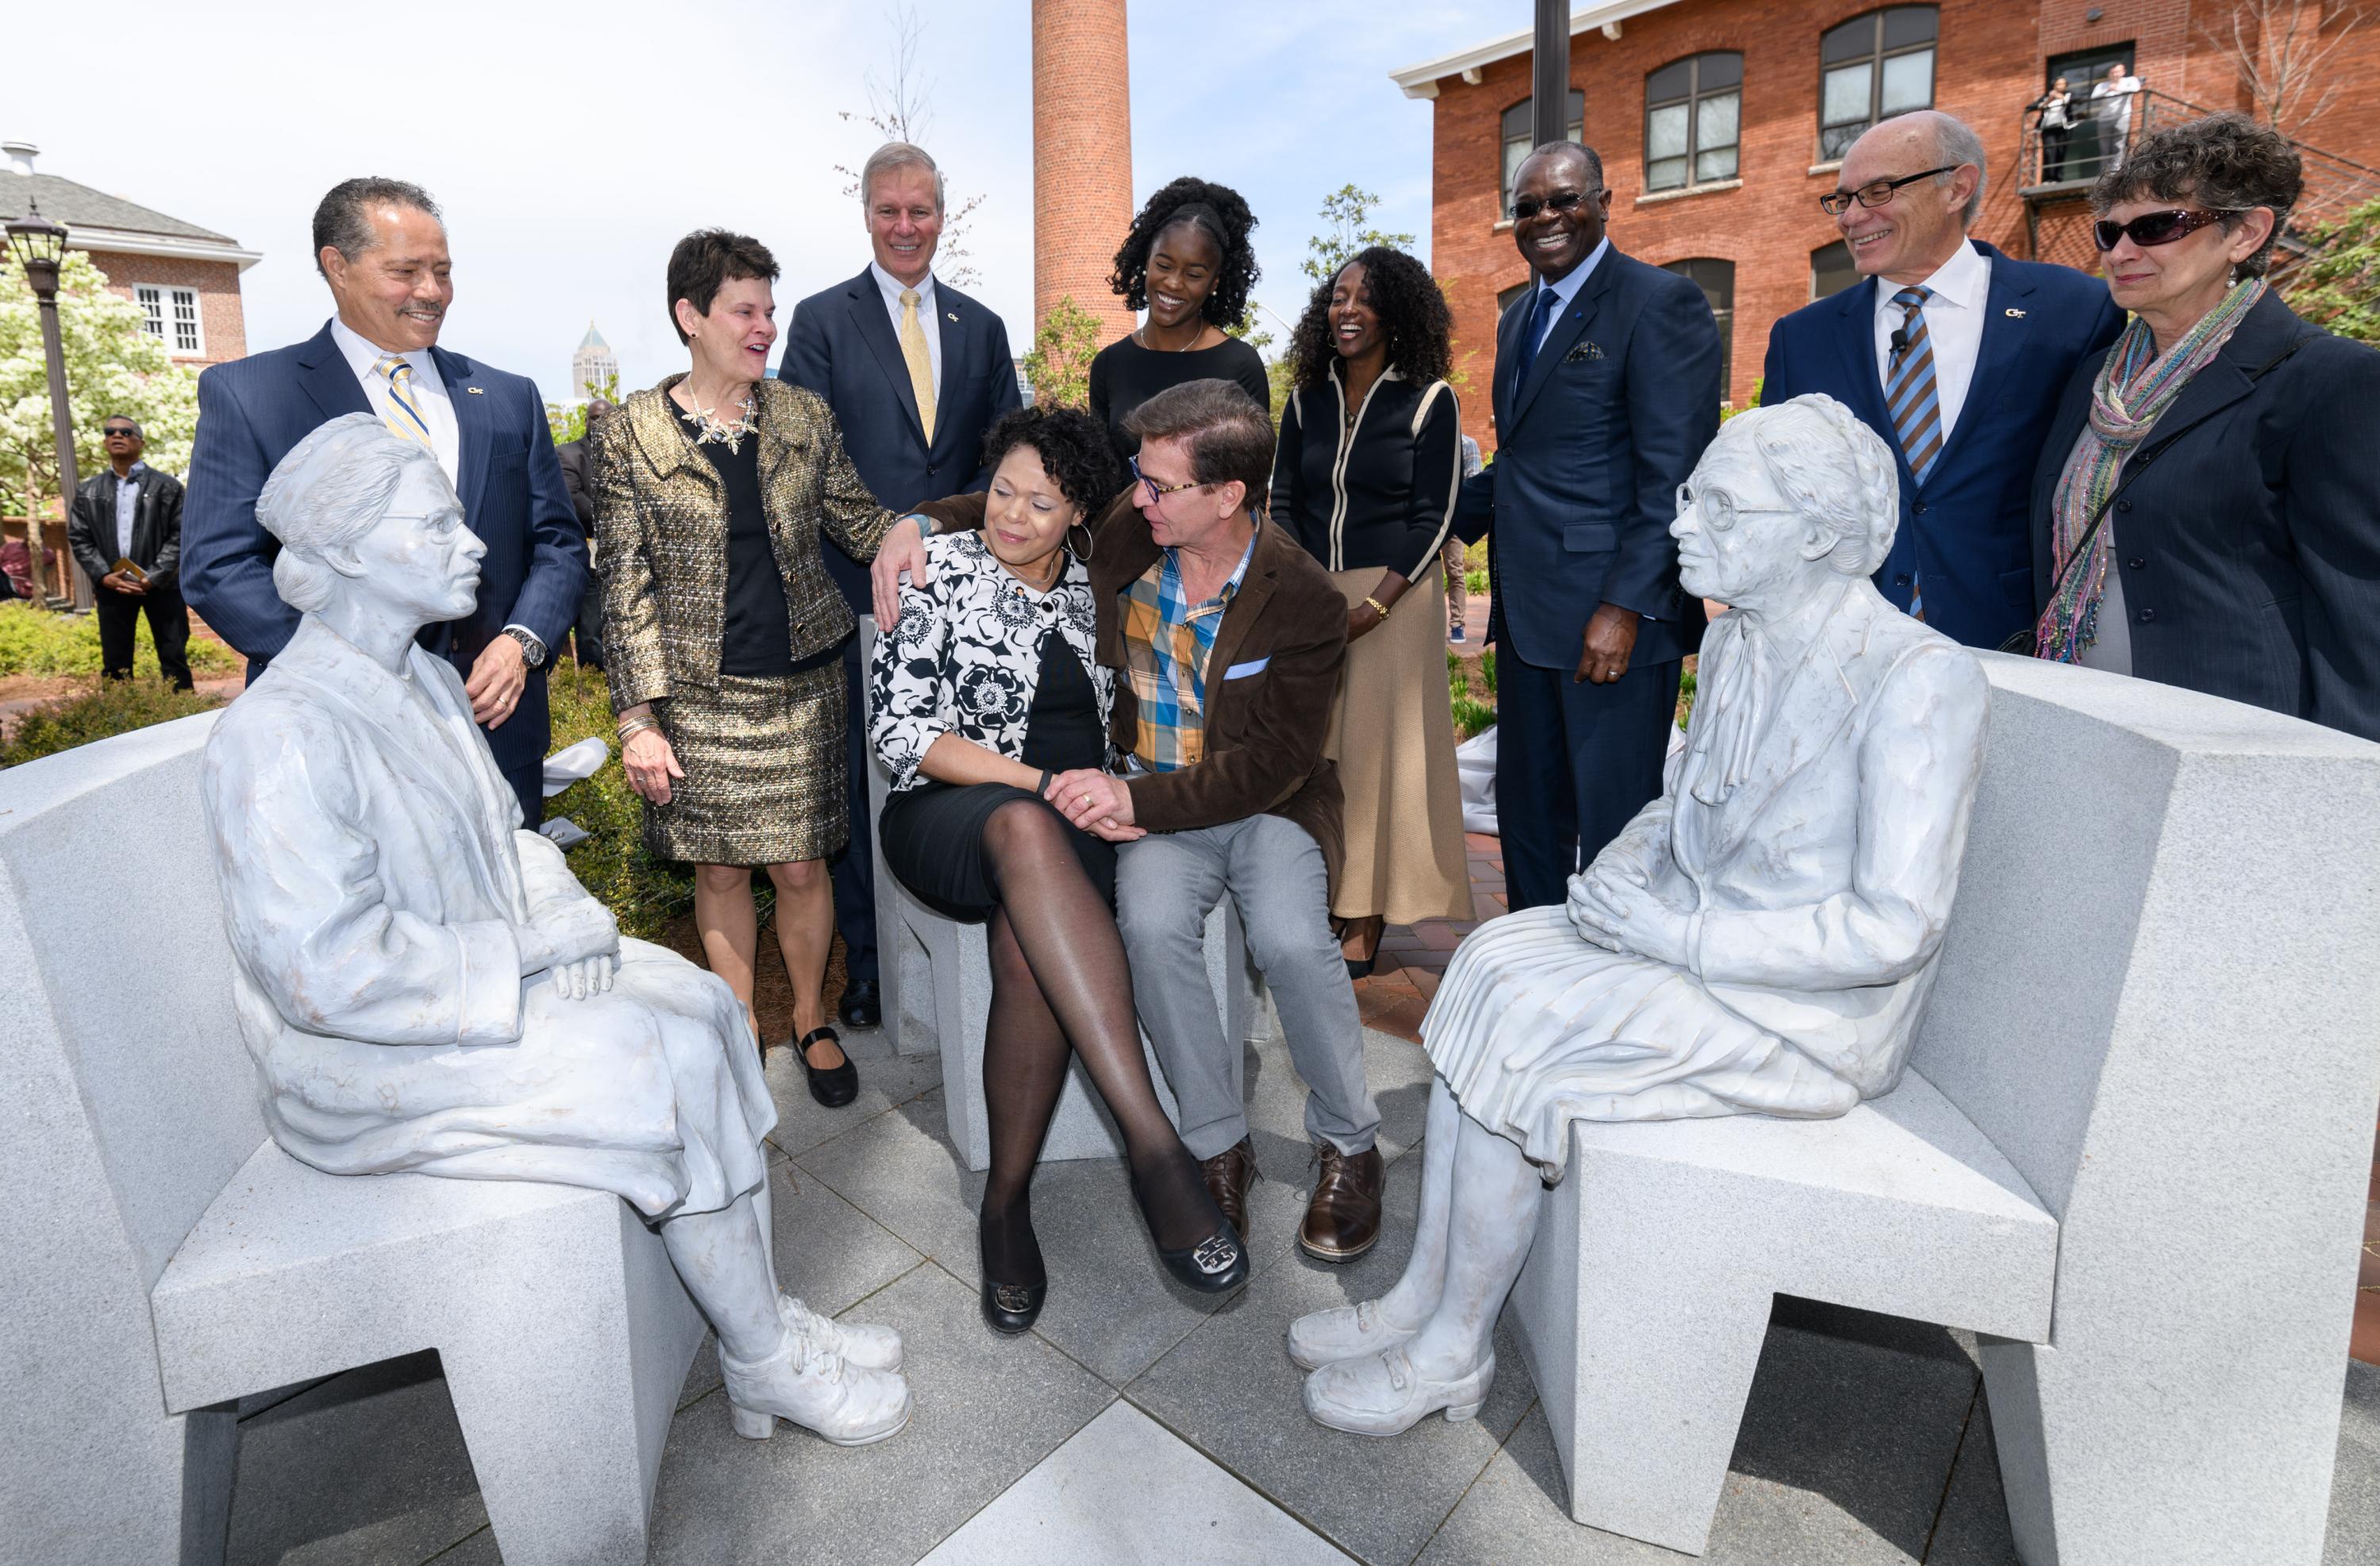 Georgia Tech unveiled a sculpture installation of Rosa Parks, called Continuing the Conversation. Seated are Urana McCauley, Parks’ great-niece, and Martin Dawe, the Atlanta artist who designed the piece. (Photo by Rob Felt)